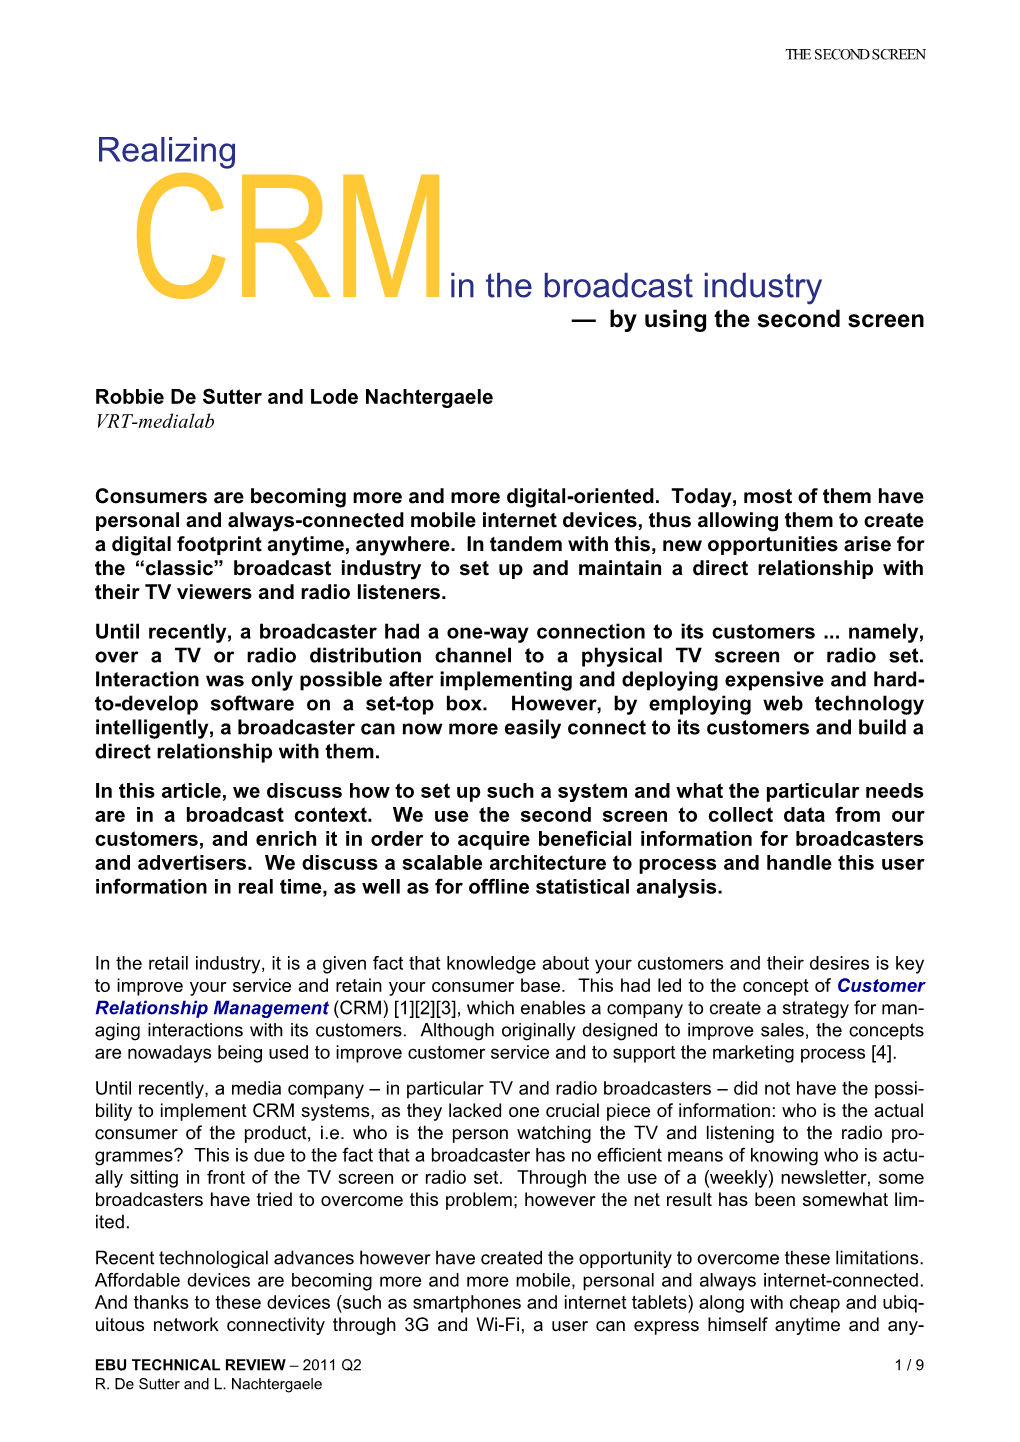 Realizing CRM in the Broadcast Industry